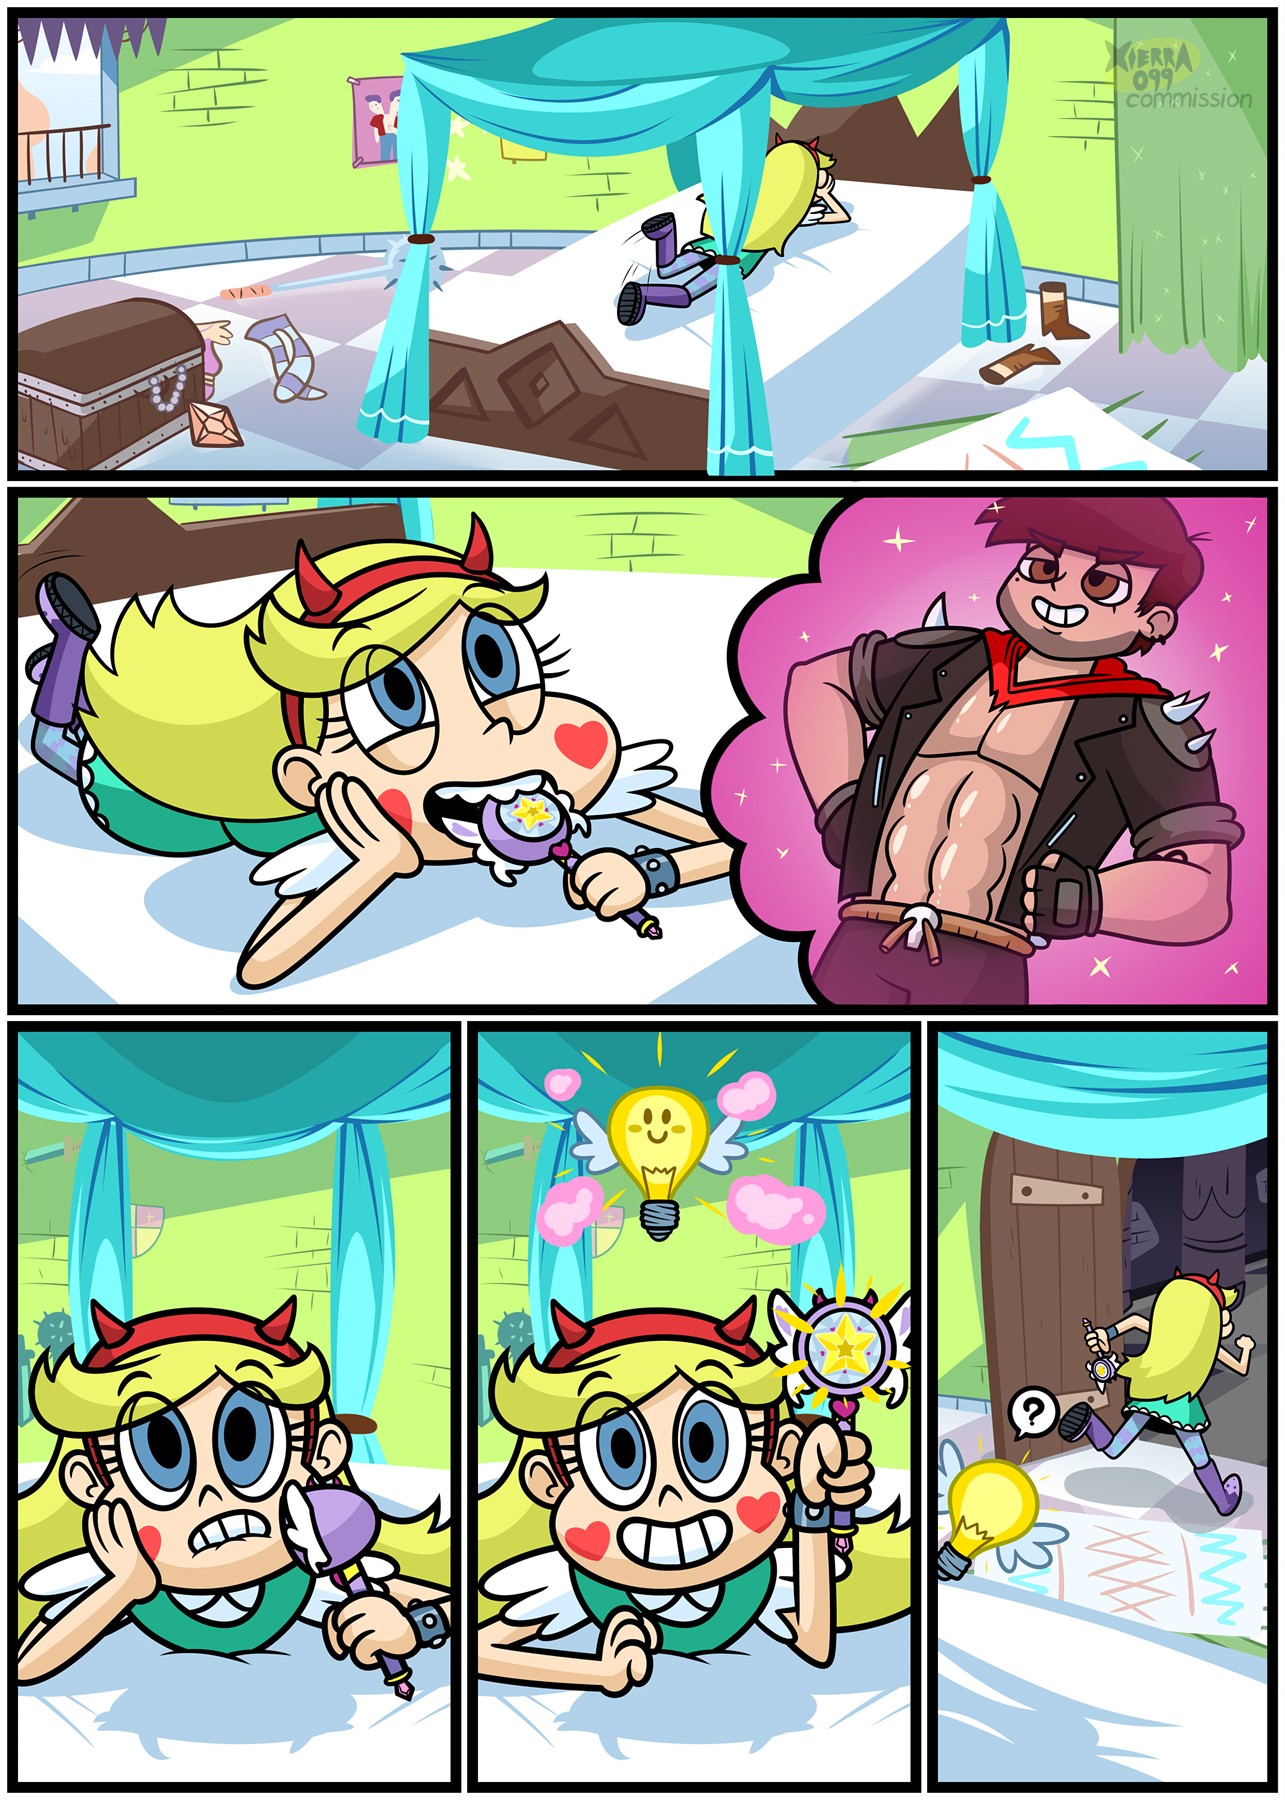 Star Vs. The Forces Of Evil Hentai